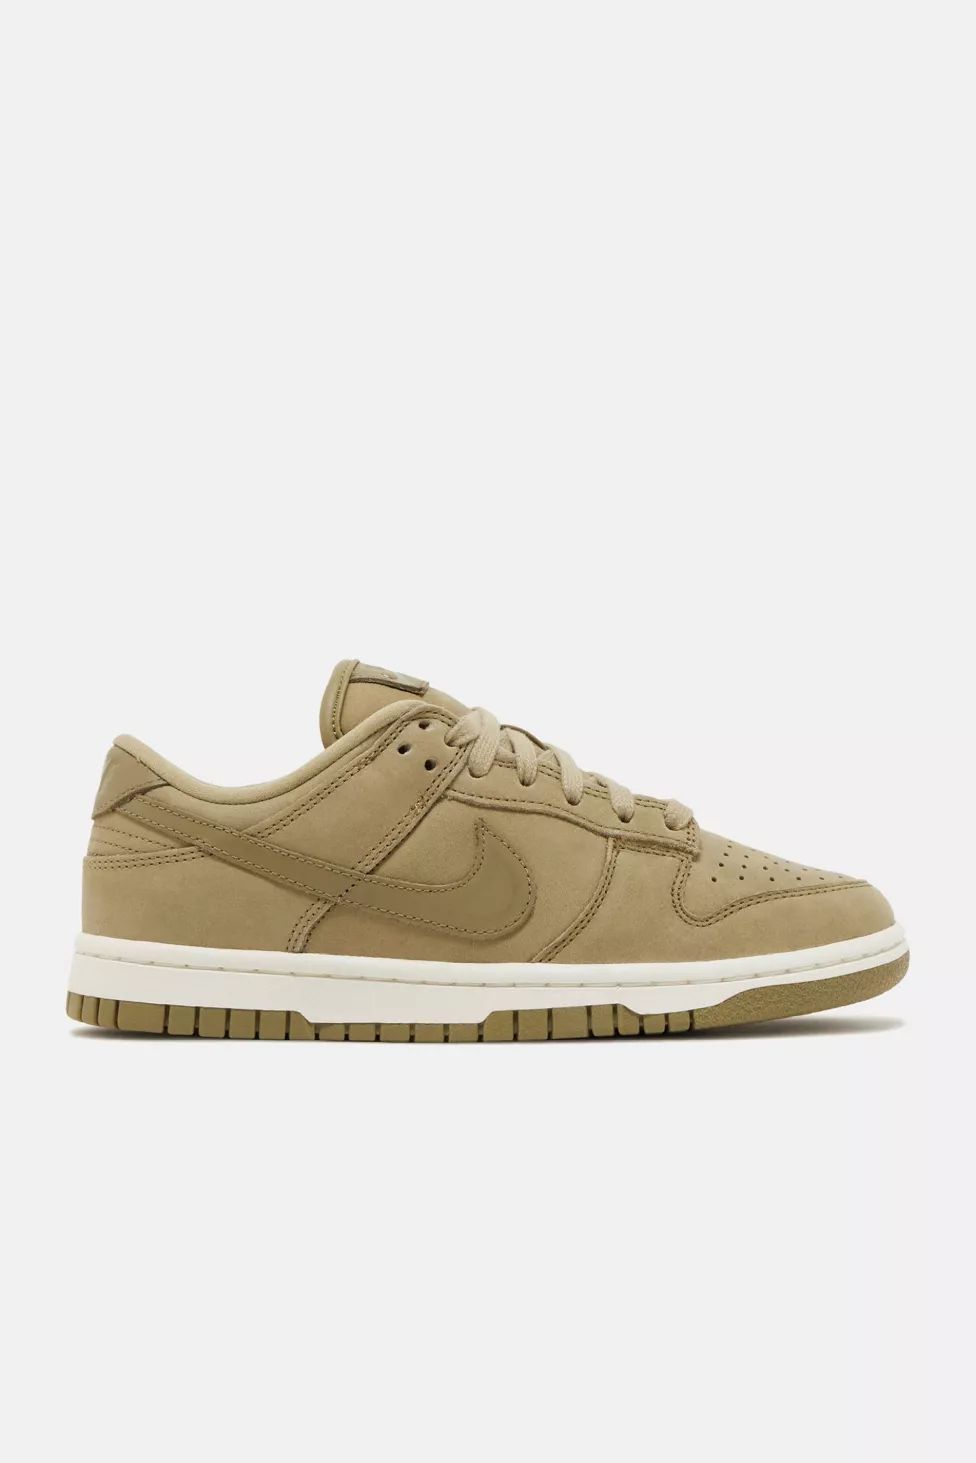 Nike Dunk Low Women's Premium 'Neutral Olive' Sneakers - DV7415-200 | Urban Outfitters (US and RoW)